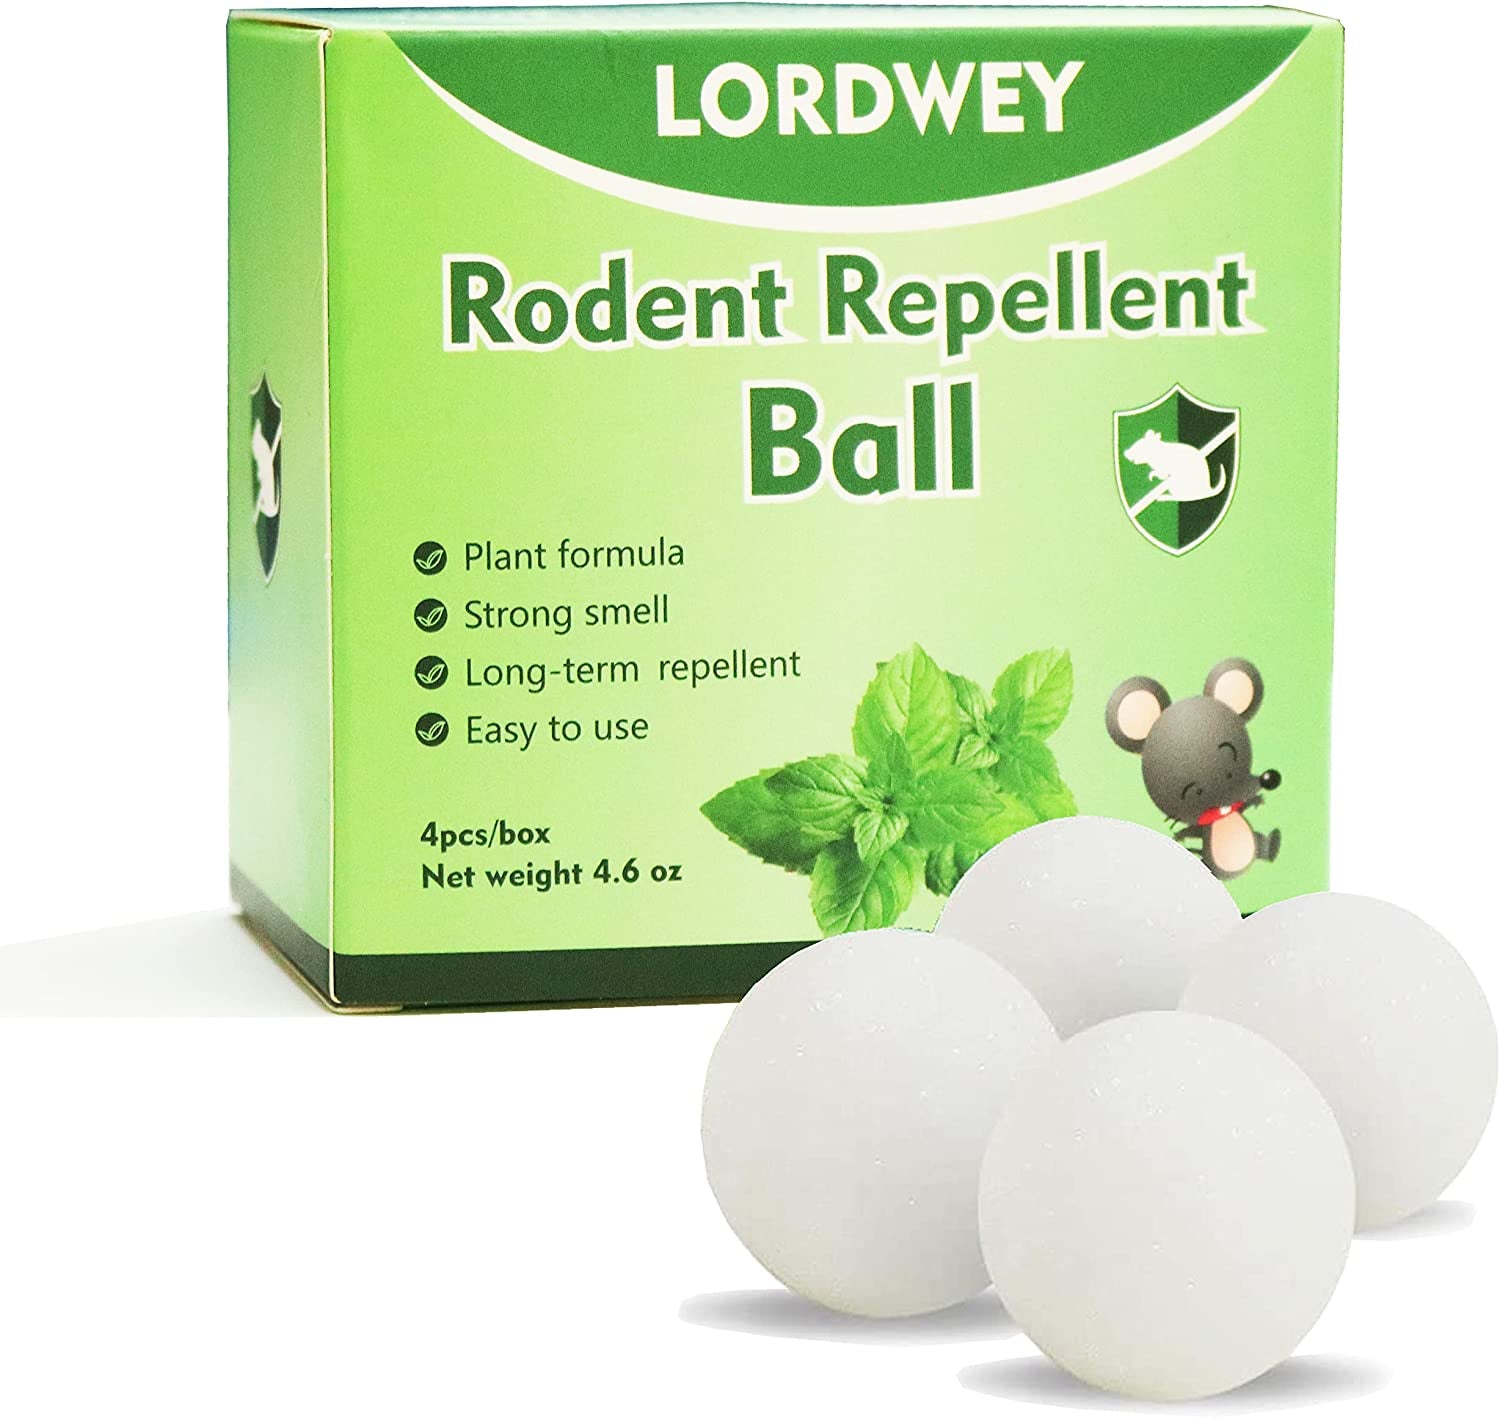 LORDWEY, LORDWEY Mouse Repellent, 4 Pack Peppermint Oil to Repel Mice and Rats, Rodent Deterrent Pill for Plant, Pest Repellent for Garden and Attic